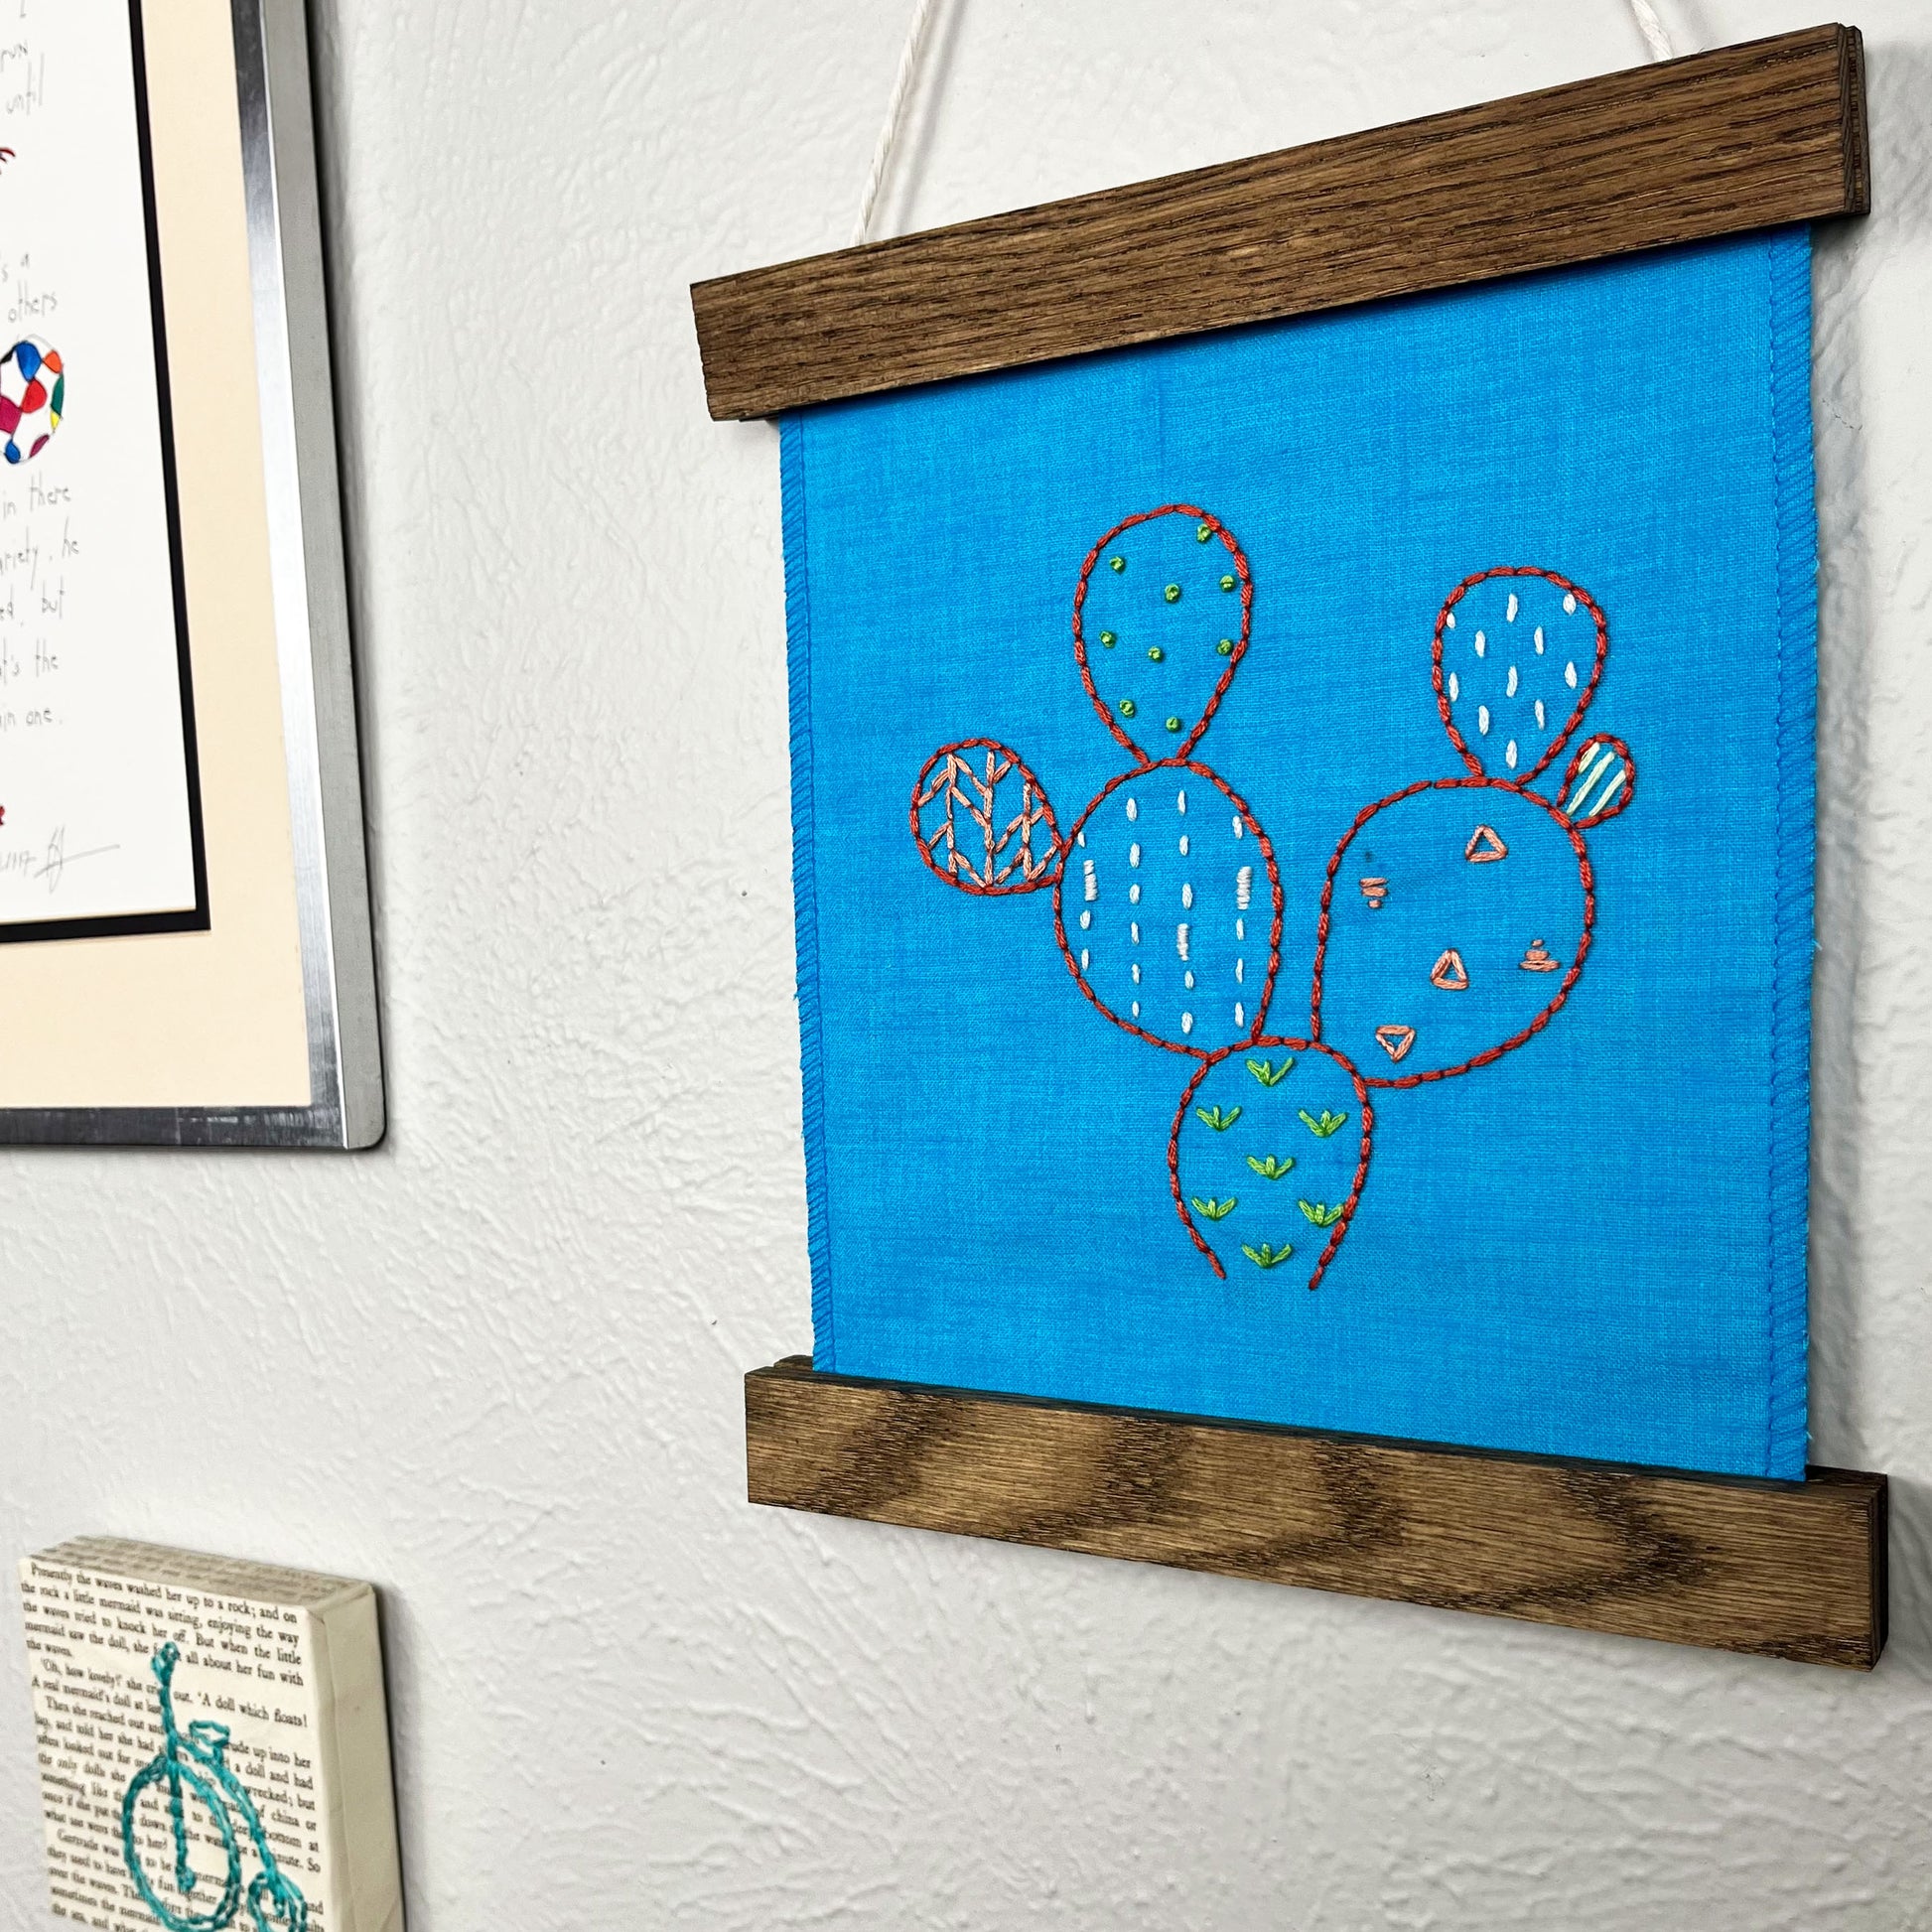 a small bright blue fabric wall hanging in a magnetic wood frame, hand embroidered with the outline of a prickly pear cactus in red, each pad filled with different stitches in different colors, hanging on a wall near other artwork